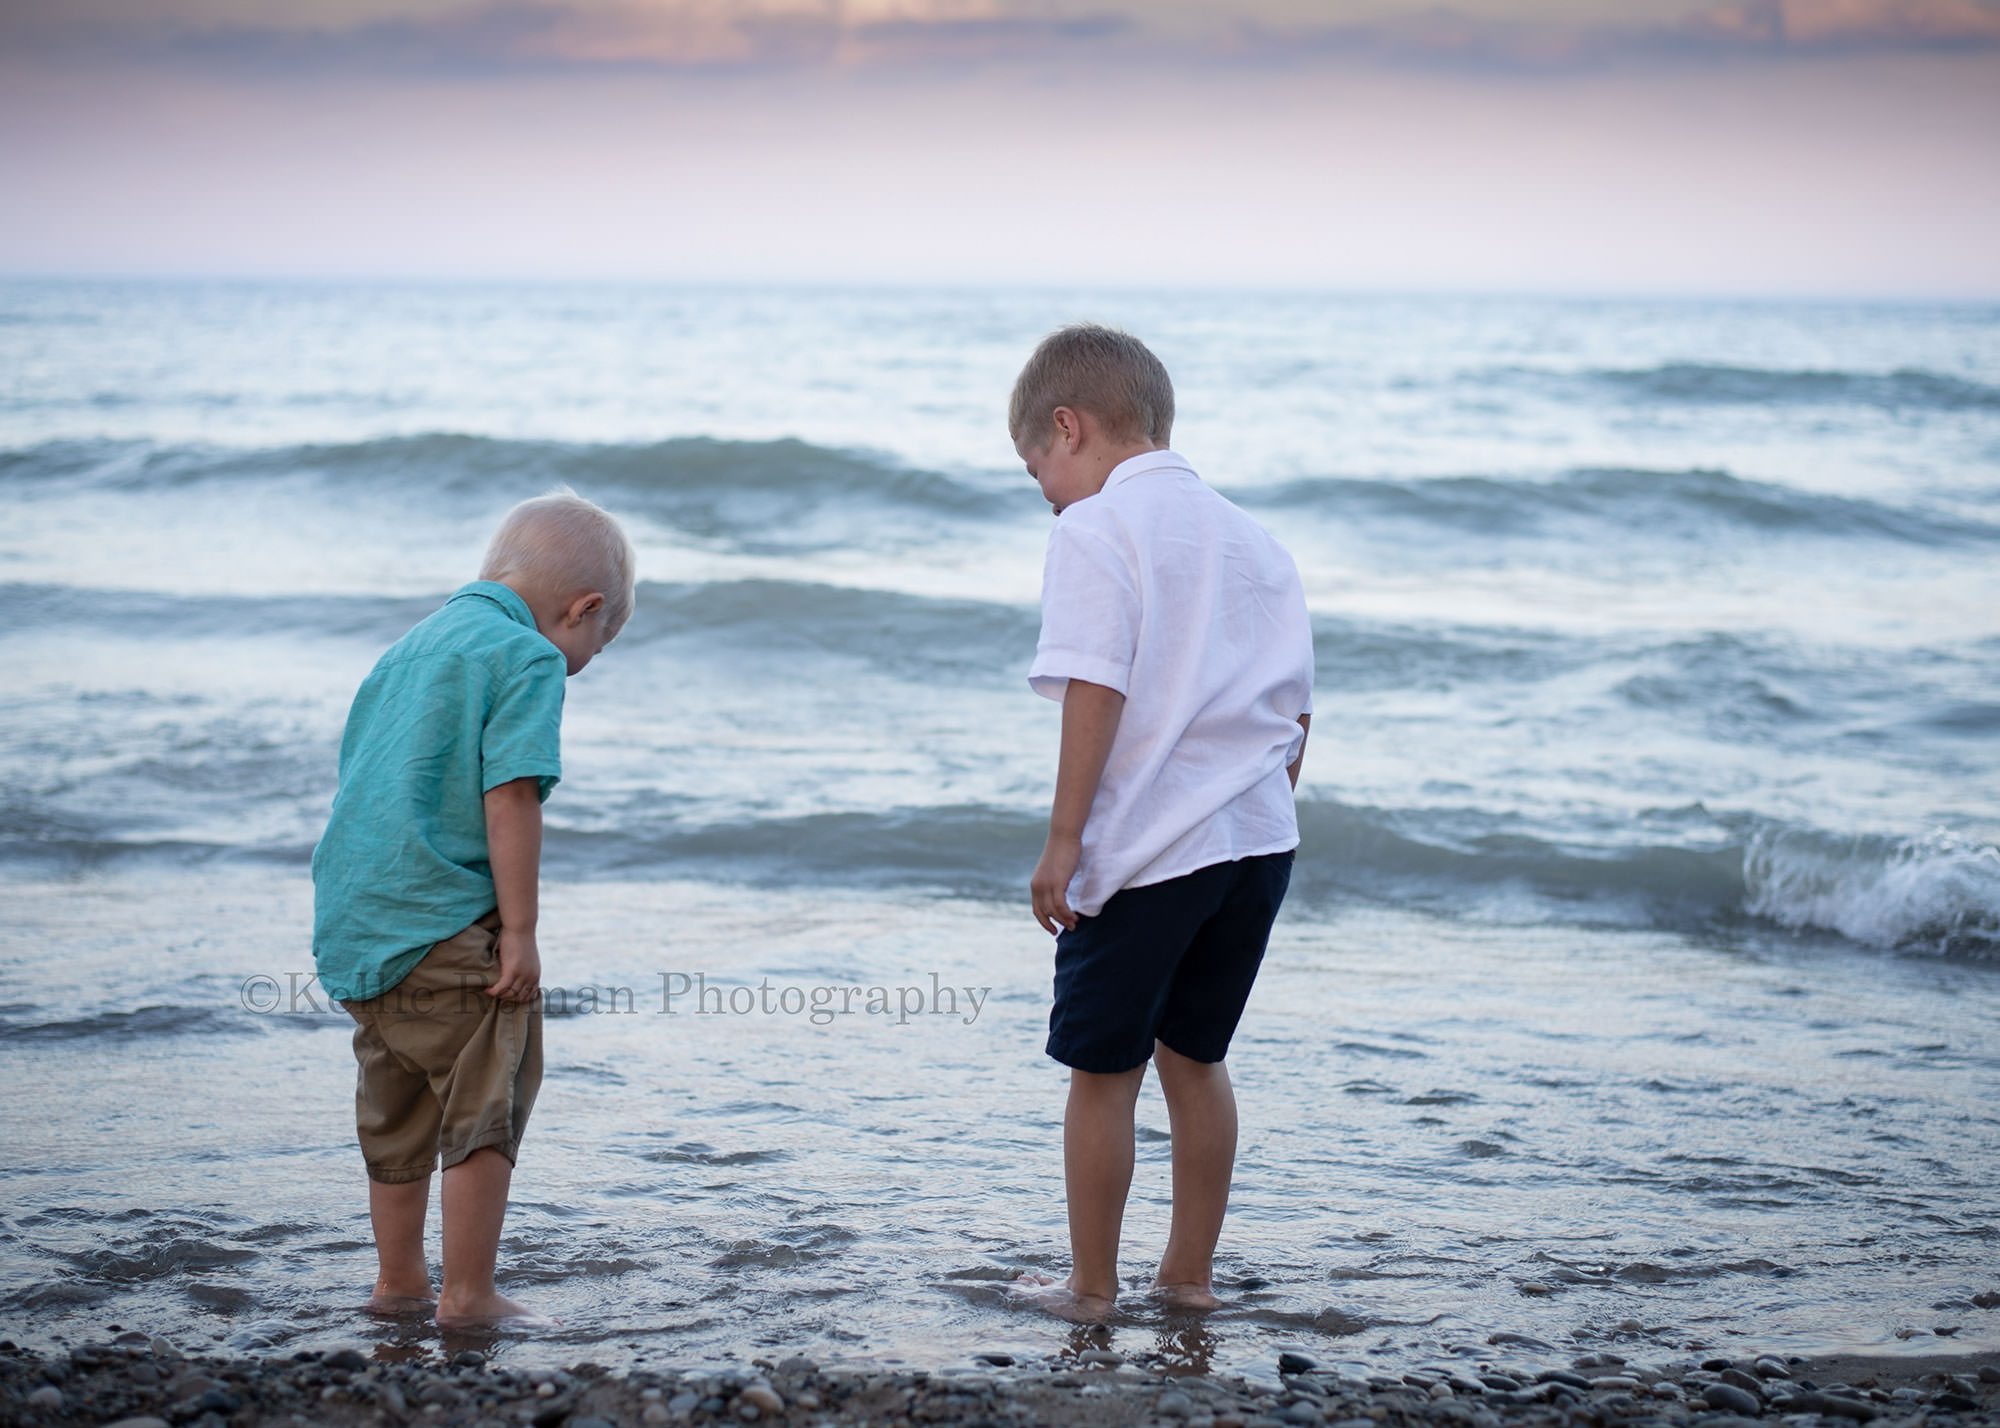 racine family session two brothers looking down on a beach in racine they have their feet in the water on a rocky beach they have on shorts and button up shirts the sky is shades of pastel with some clouds